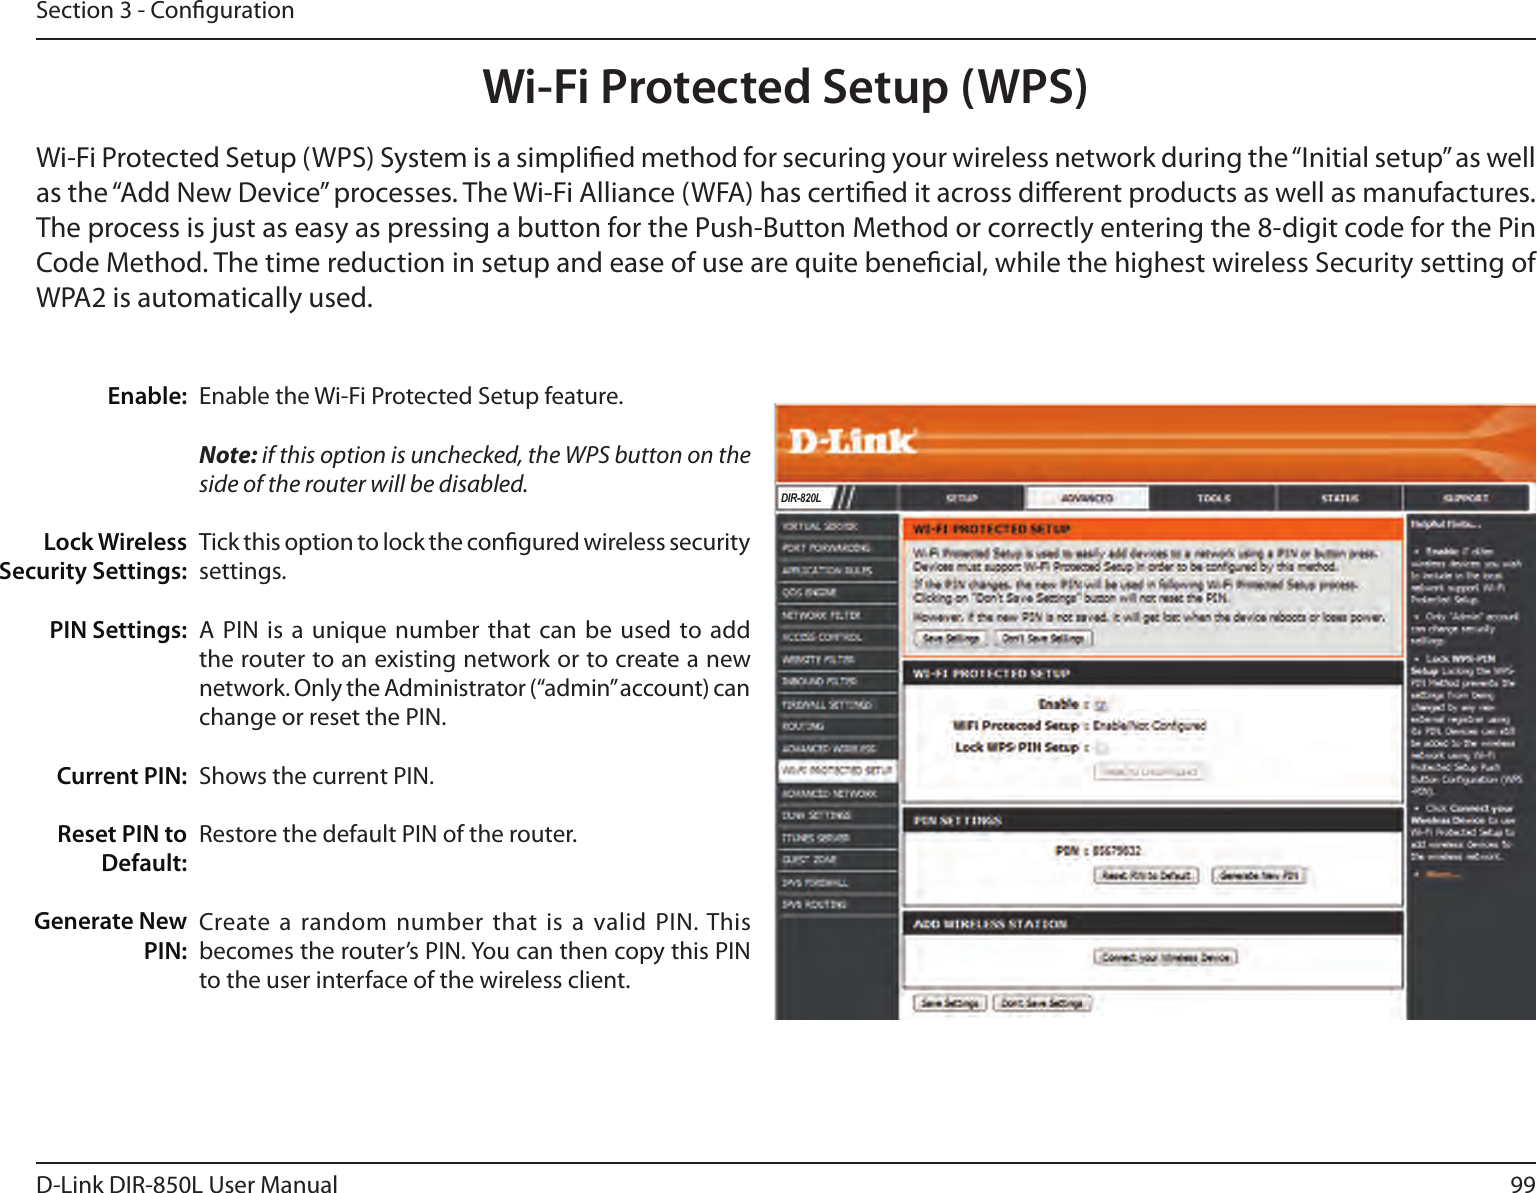 99D-Link DIR-850L User ManualSection 3 - CongurationWi-Fi Protected Setup (WPS)Enable the Wi-Fi Protected Setup feature. Note: if this option is unchecked, the WPS button on the side of the router will be disabled.Tick this option to lock the congured wireless security settings.A PIN is  a unique number  that can be  used to add the router to an existing network or to create a new network. Only the Administrator (“admin” account) can change or reset the PIN. Shows the current PIN. Restore the default PIN of the router. Create a random  number that is a valid PIN. This becomes the router’s PIN. You can then copy this PIN to the user interface of the wireless client.Enable:Lock Wireless Security Settings:PIN Settings:Current PIN:Reset PIN to Default:Generate New PIN:Wi-Fi Protected Setup (WPS) System is a simplied method for securing your wireless network during the “Initial setup” as well as the “Add New Device” processes. The Wi-Fi Alliance (WFA) has certied it across dierent products as well as manufactures. The process is just as easy as pressing a button for the Push-Button Method or correctly entering the 8-digit code for the Pin Code Method. The time reduction in setup and ease of use are quite benecial, while the highest wireless Security setting of WPA2 is automatically used.DIR-820L